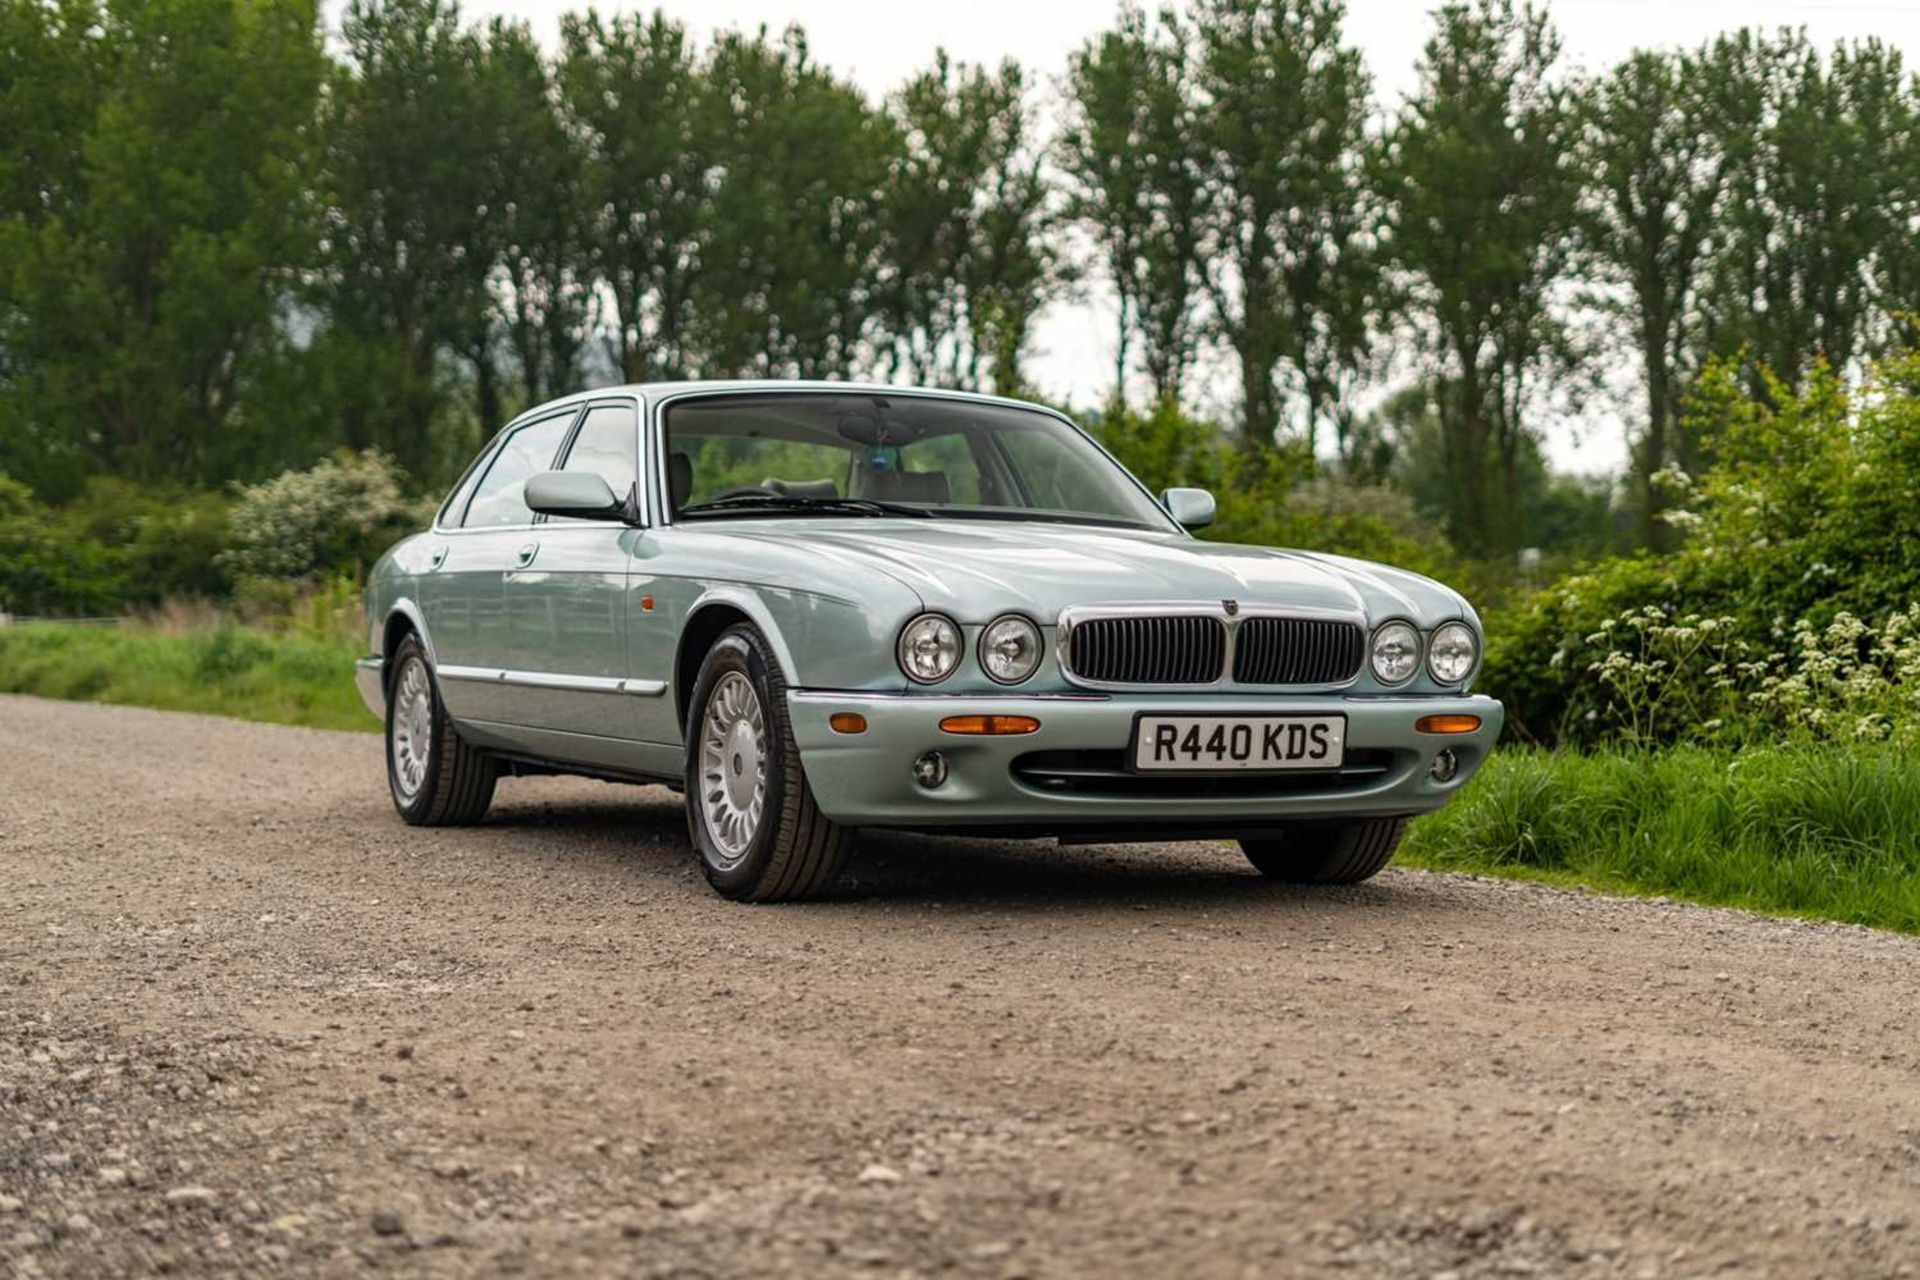 1998 Jaguar XJ8 ***NO RESERVE*** Just 40,000 miles from new and 1 owner from new